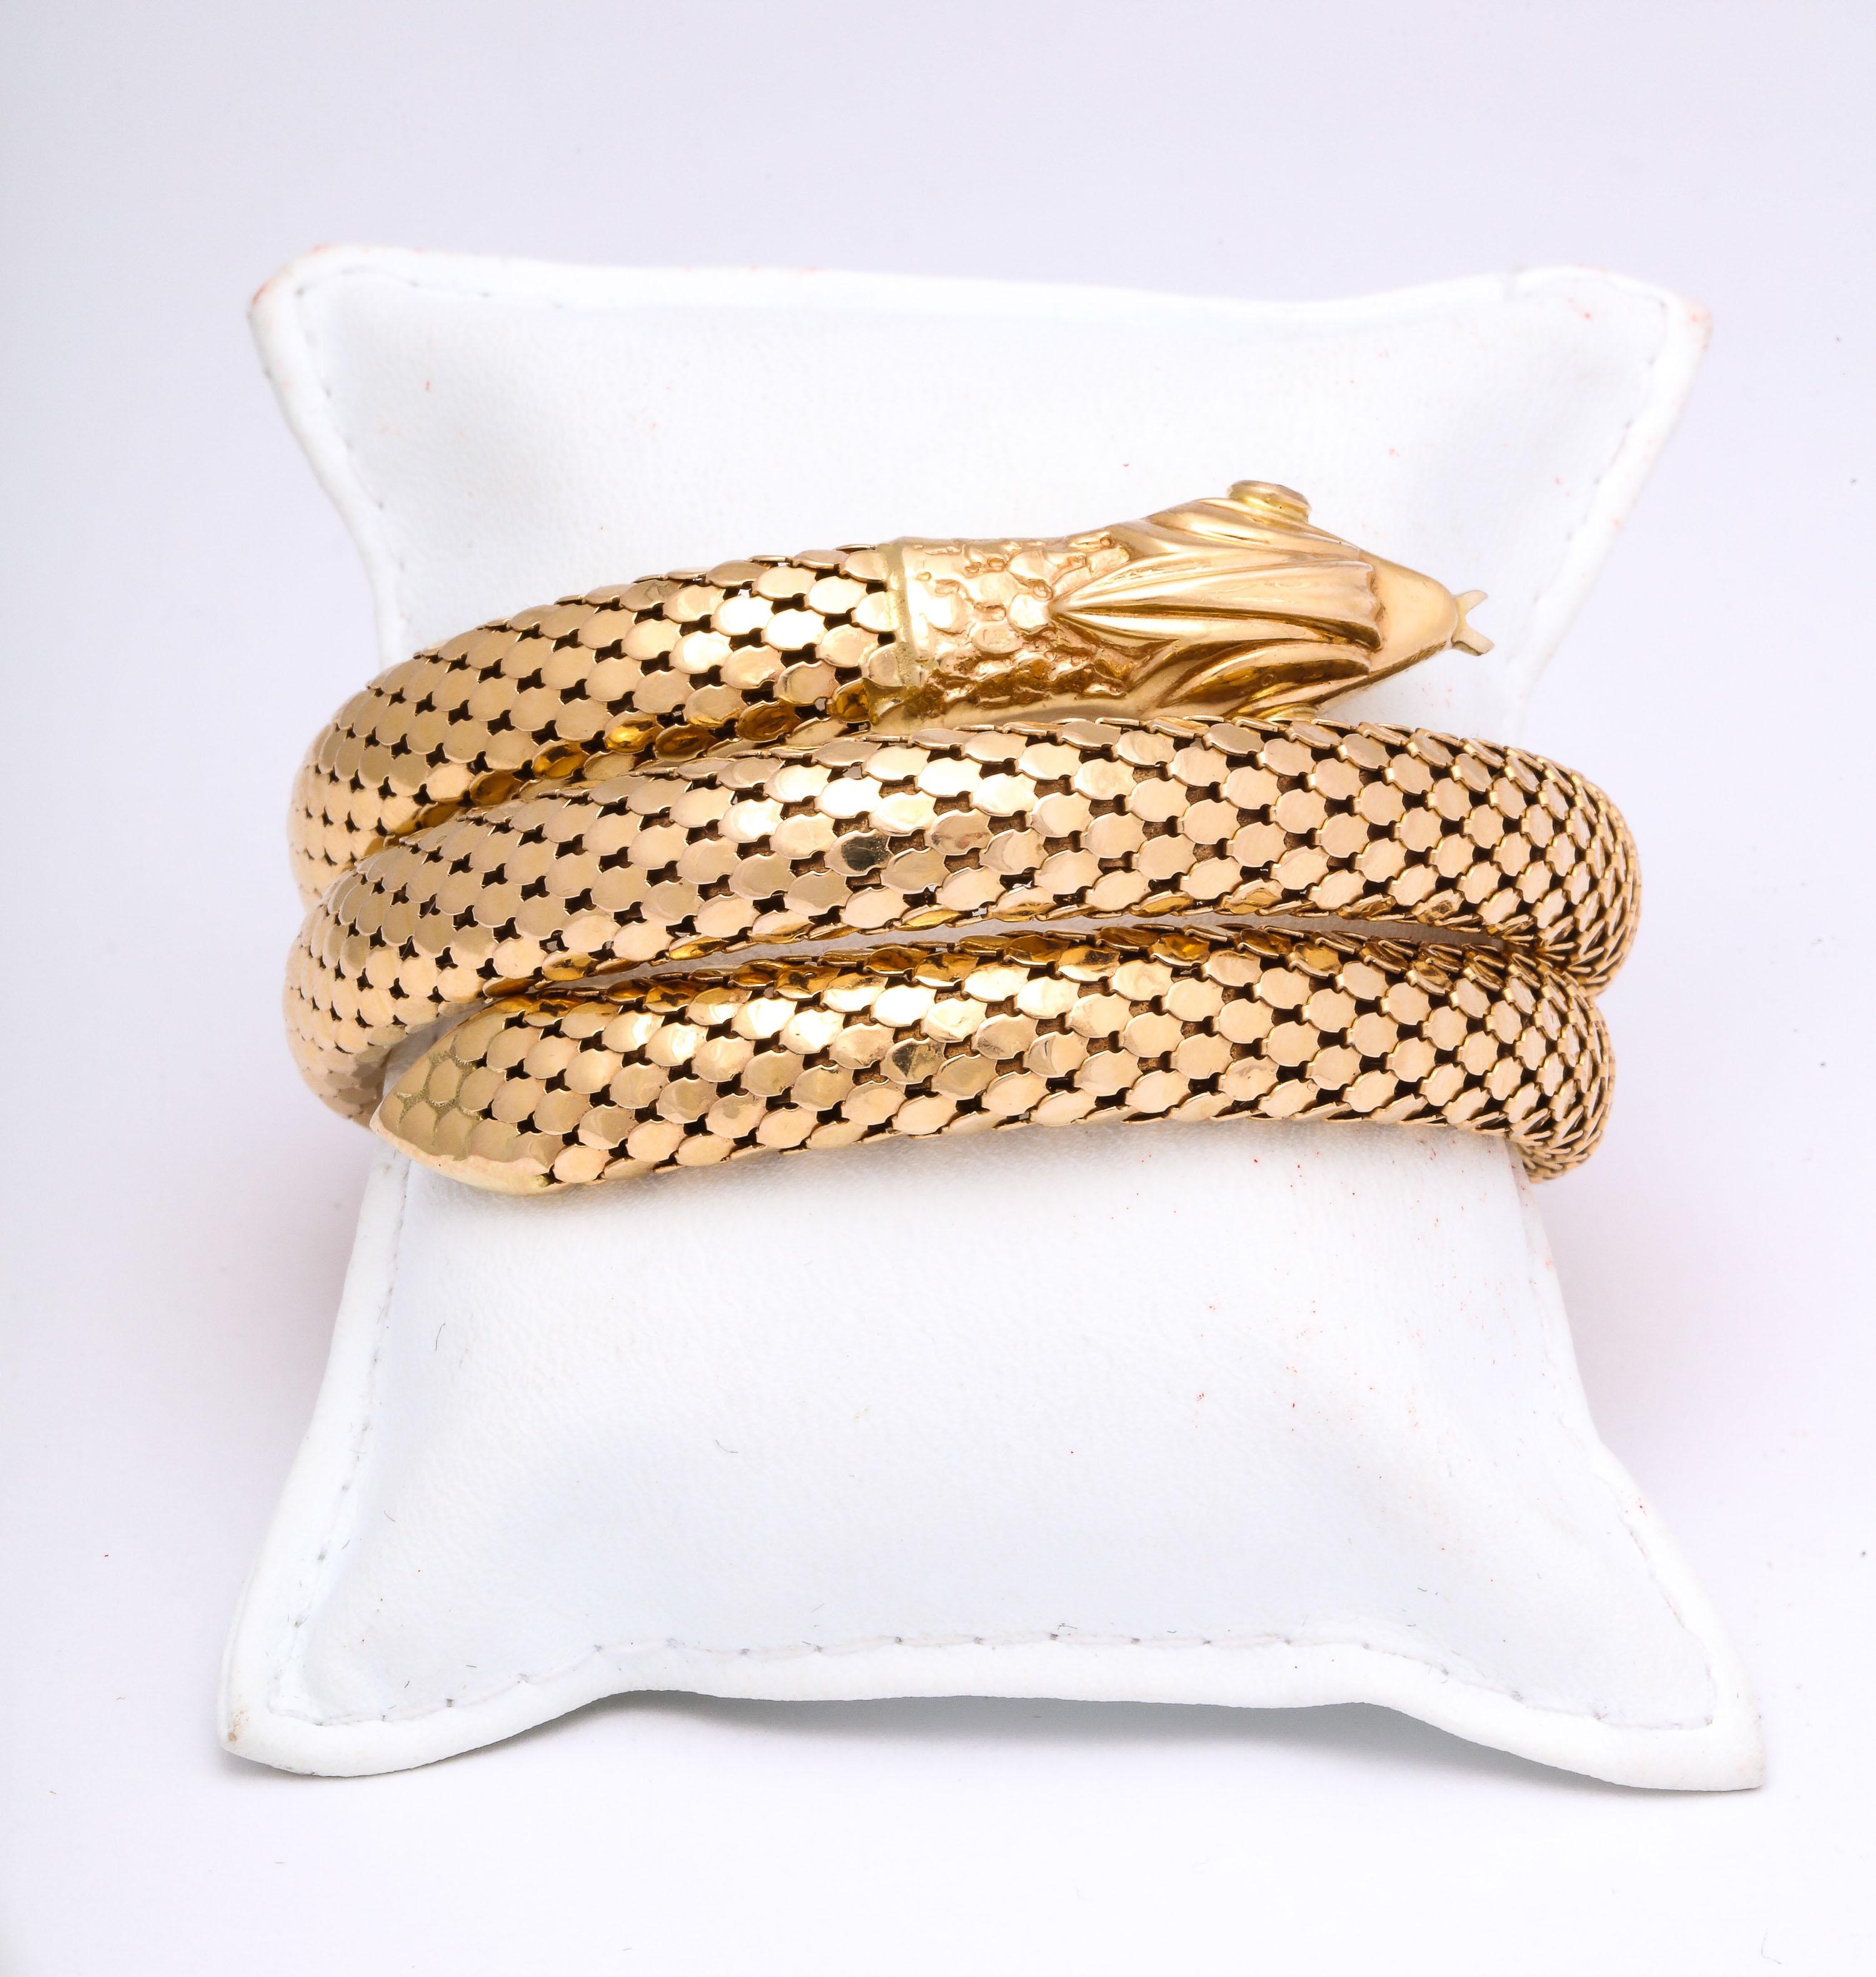 One 18kt Yellow Gold Figural Snake Wrap Around Bracelet With .15ct Diamonds For its Eyes. Created In 1960's In Italy. Fits Standard Wrist Size.Beautiful Textured Snakeskin Pattern For Snakes Body.